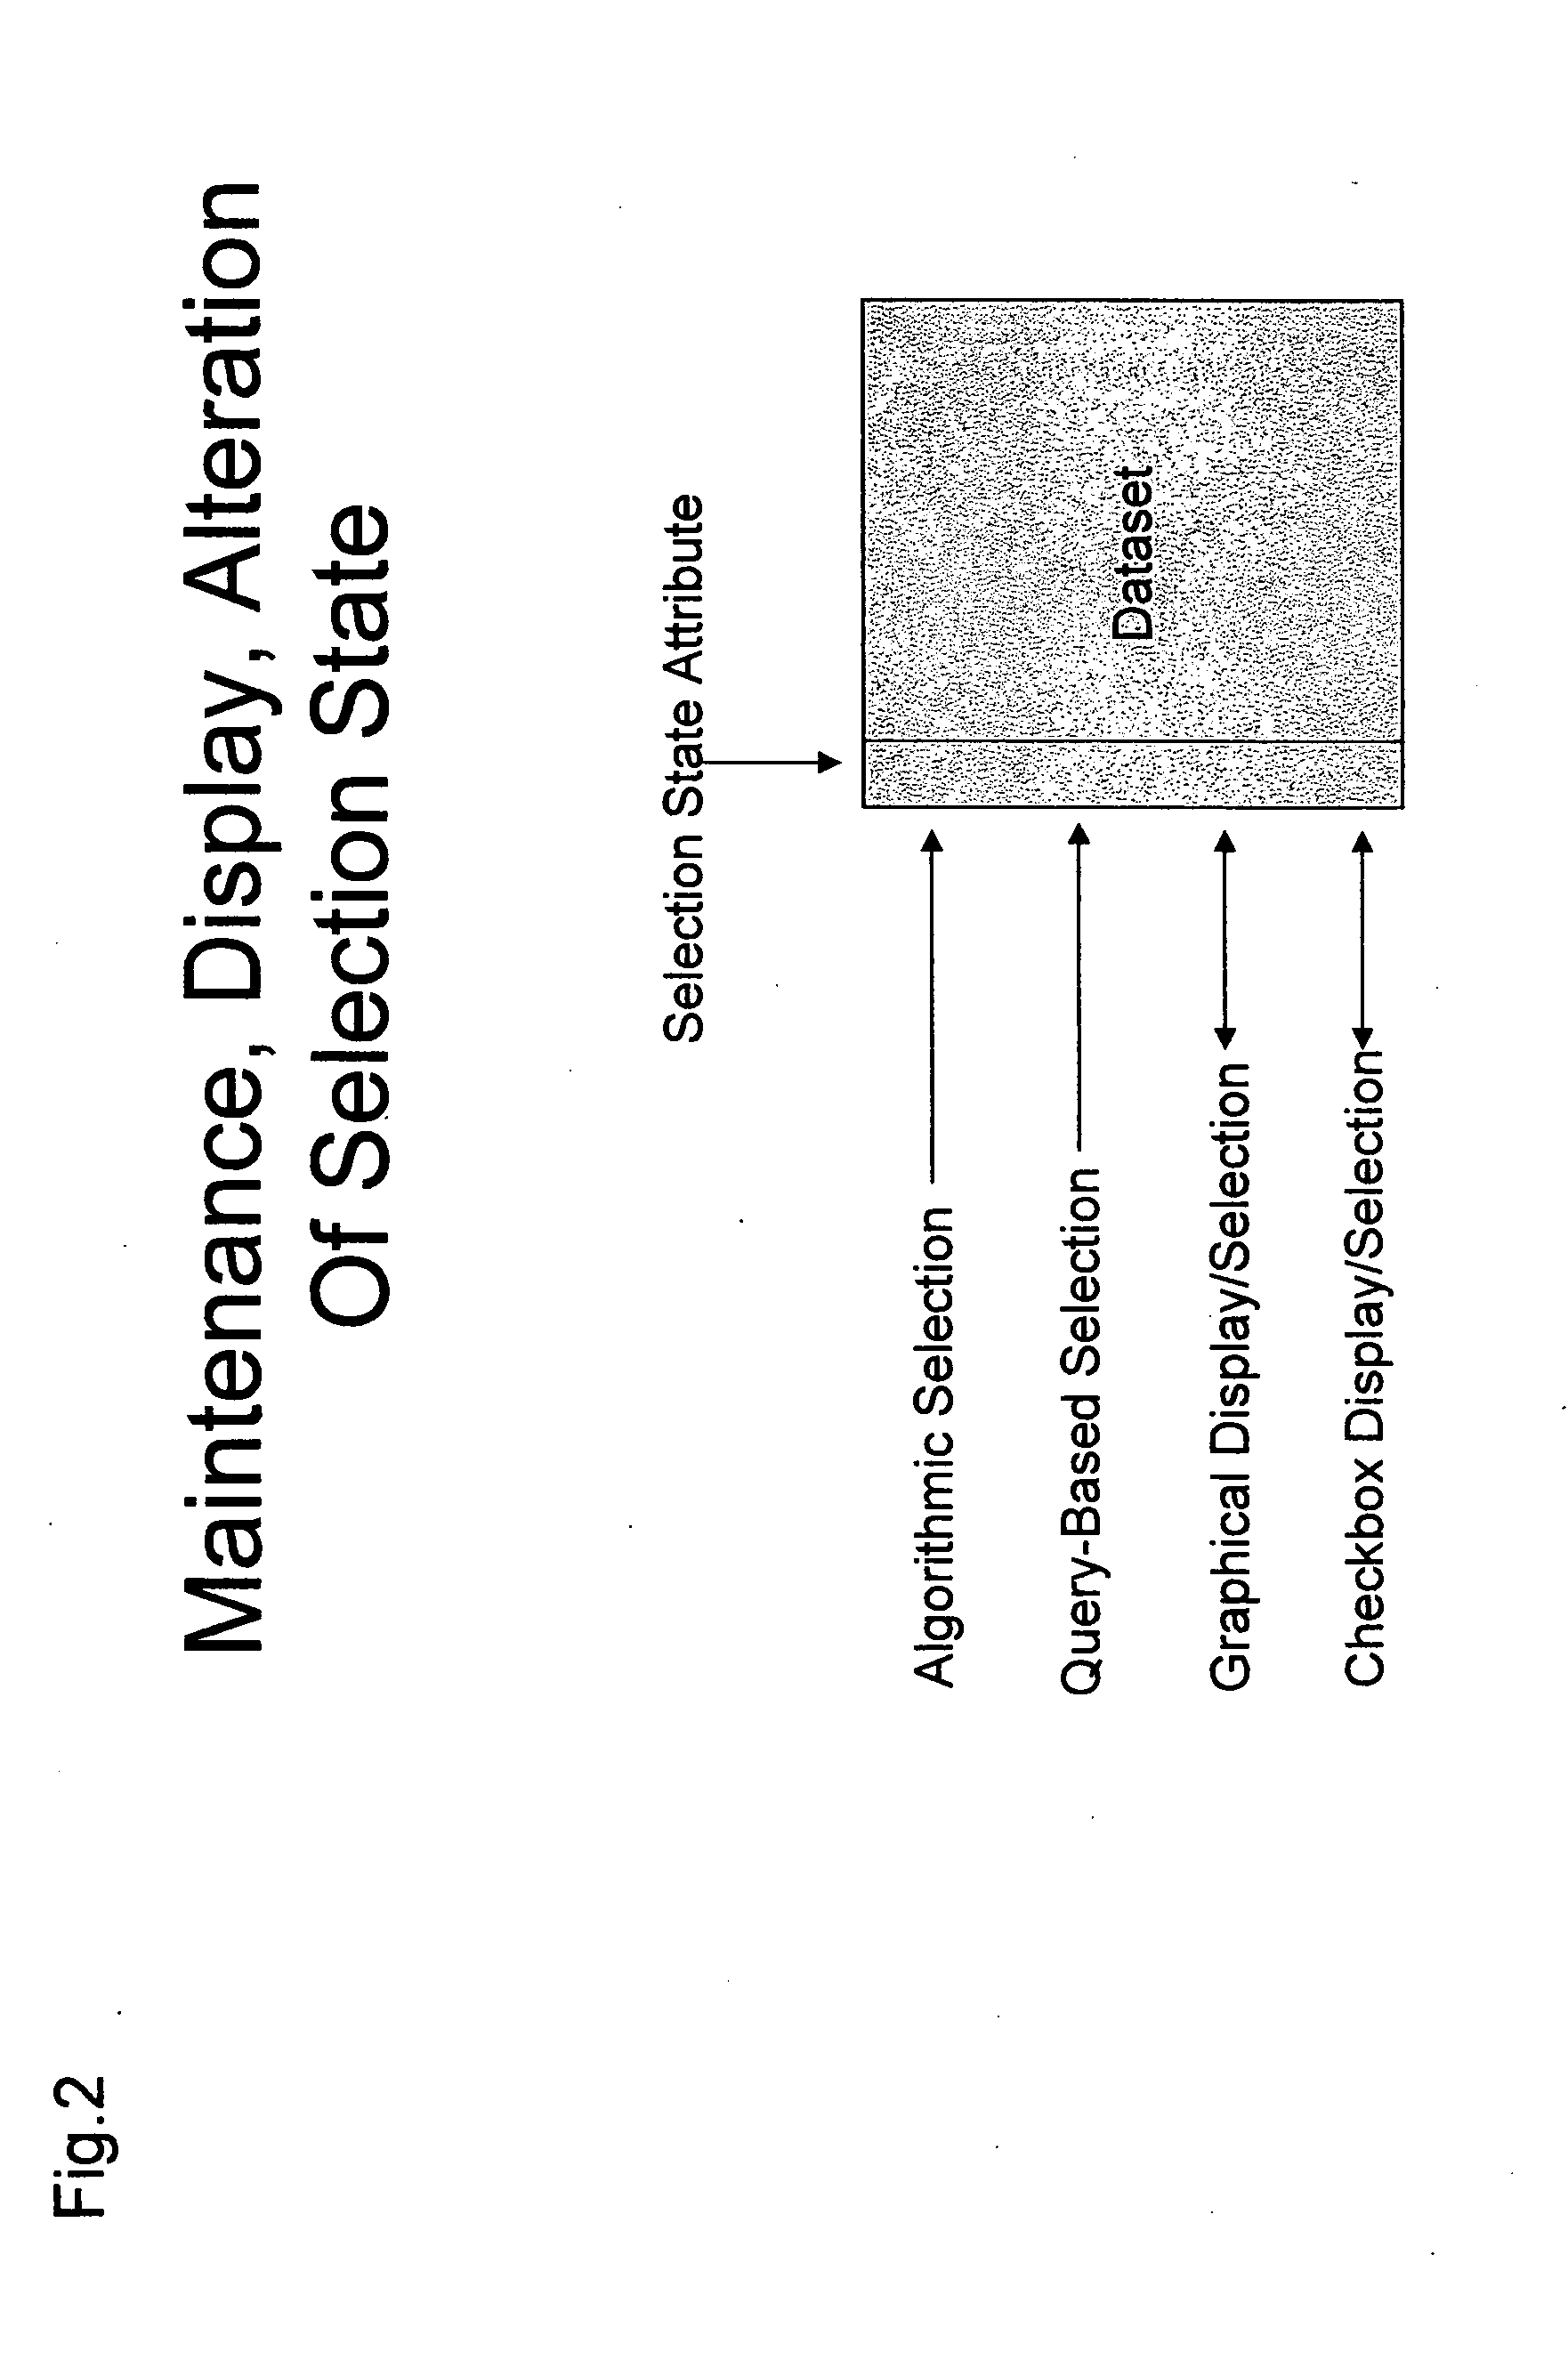 System for visualization and analysis of numerical and chemical information